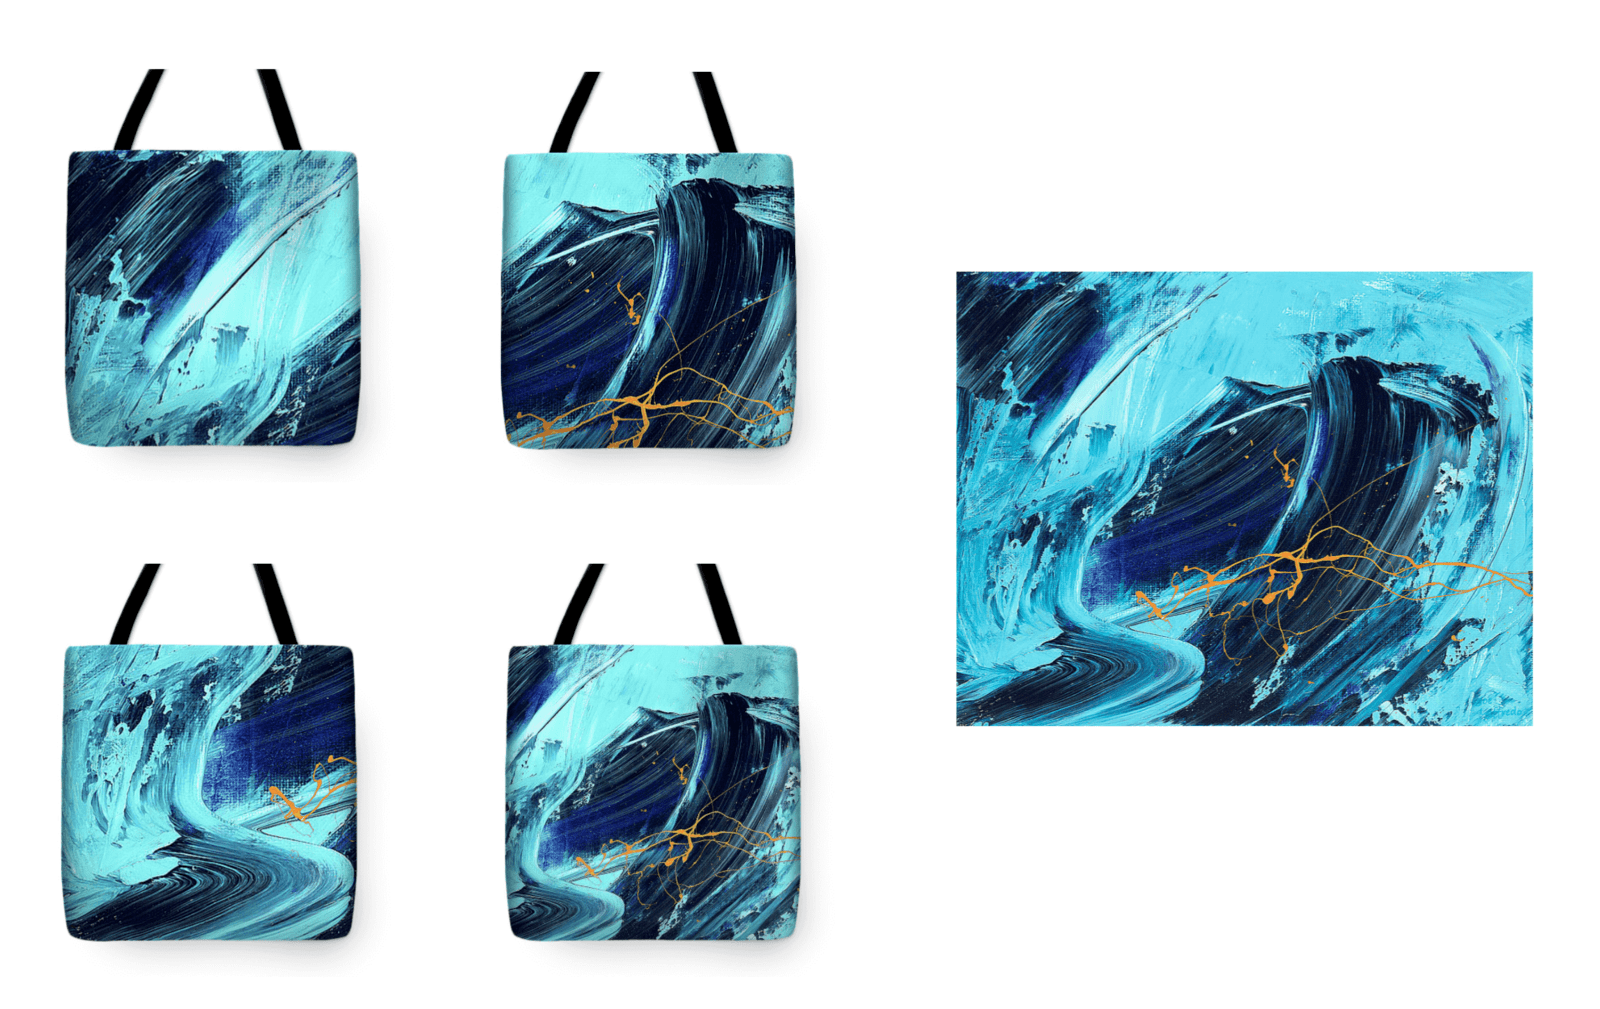 Tote bags available at https://pixels.com/featured/surfer-heaven-joe-loffredo.html?product=tote-bag